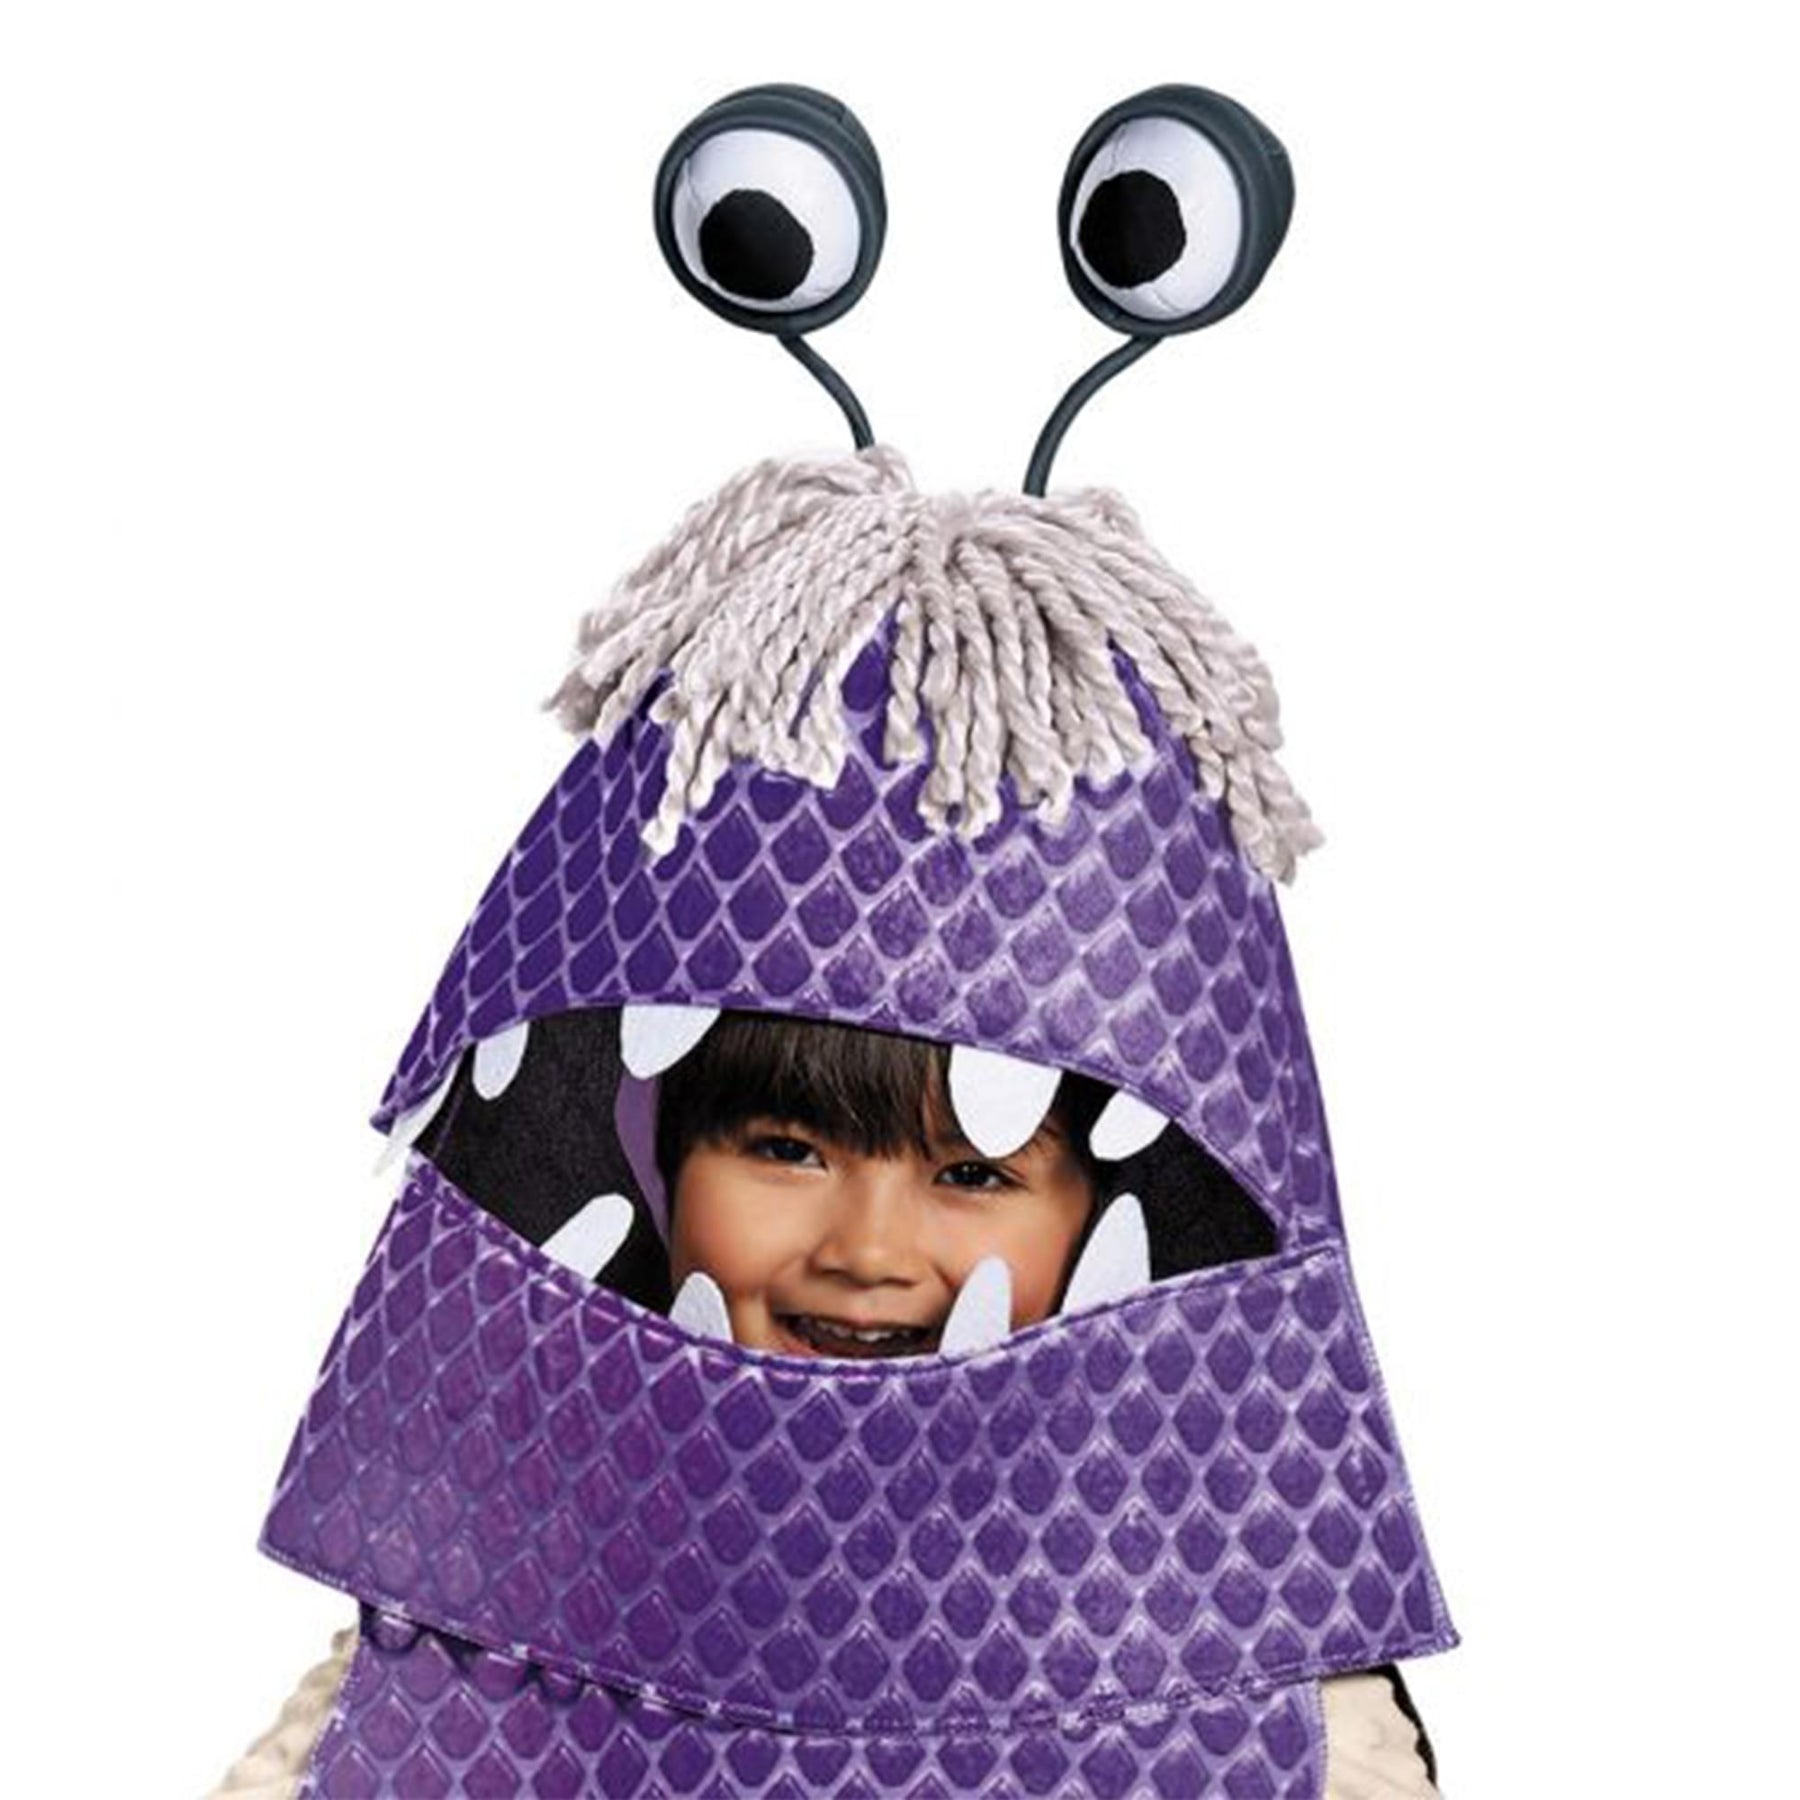 Disney Monsters, Inc. Boo Deluxe Toddler Costume